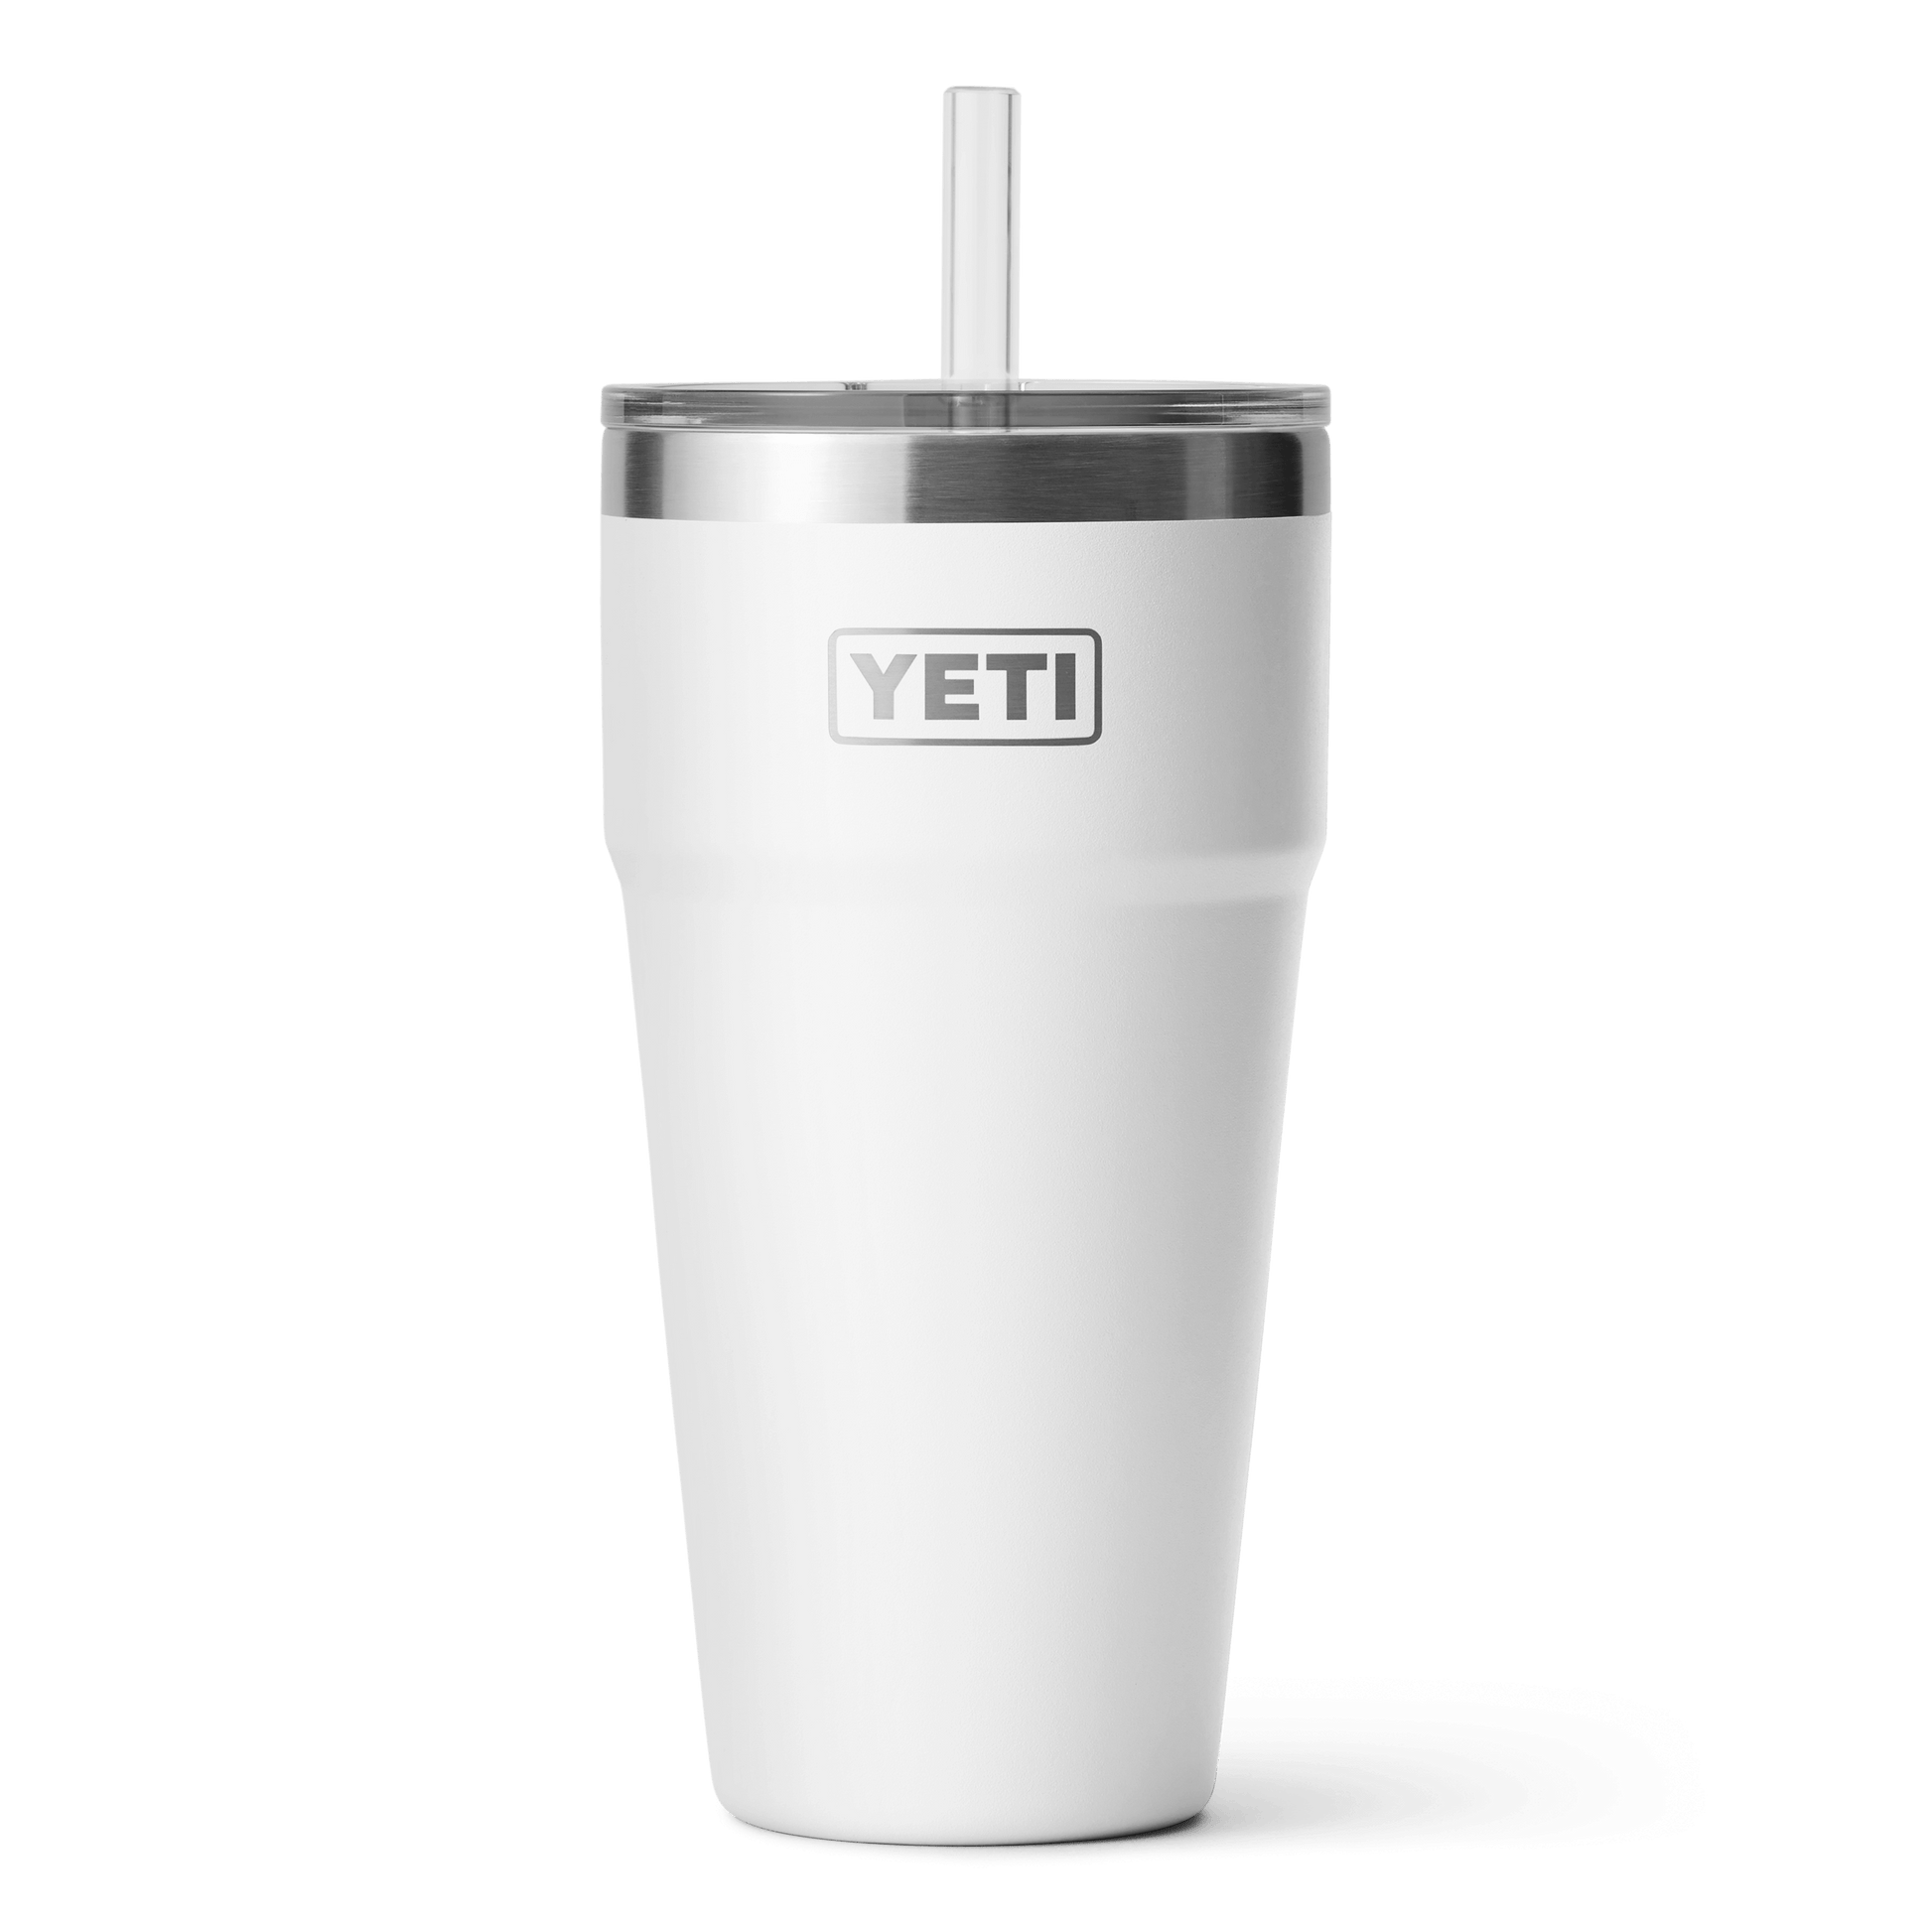 Yeti Rambler 26 Oz Cup With Straw Lid in Black - New & 100% Authentic